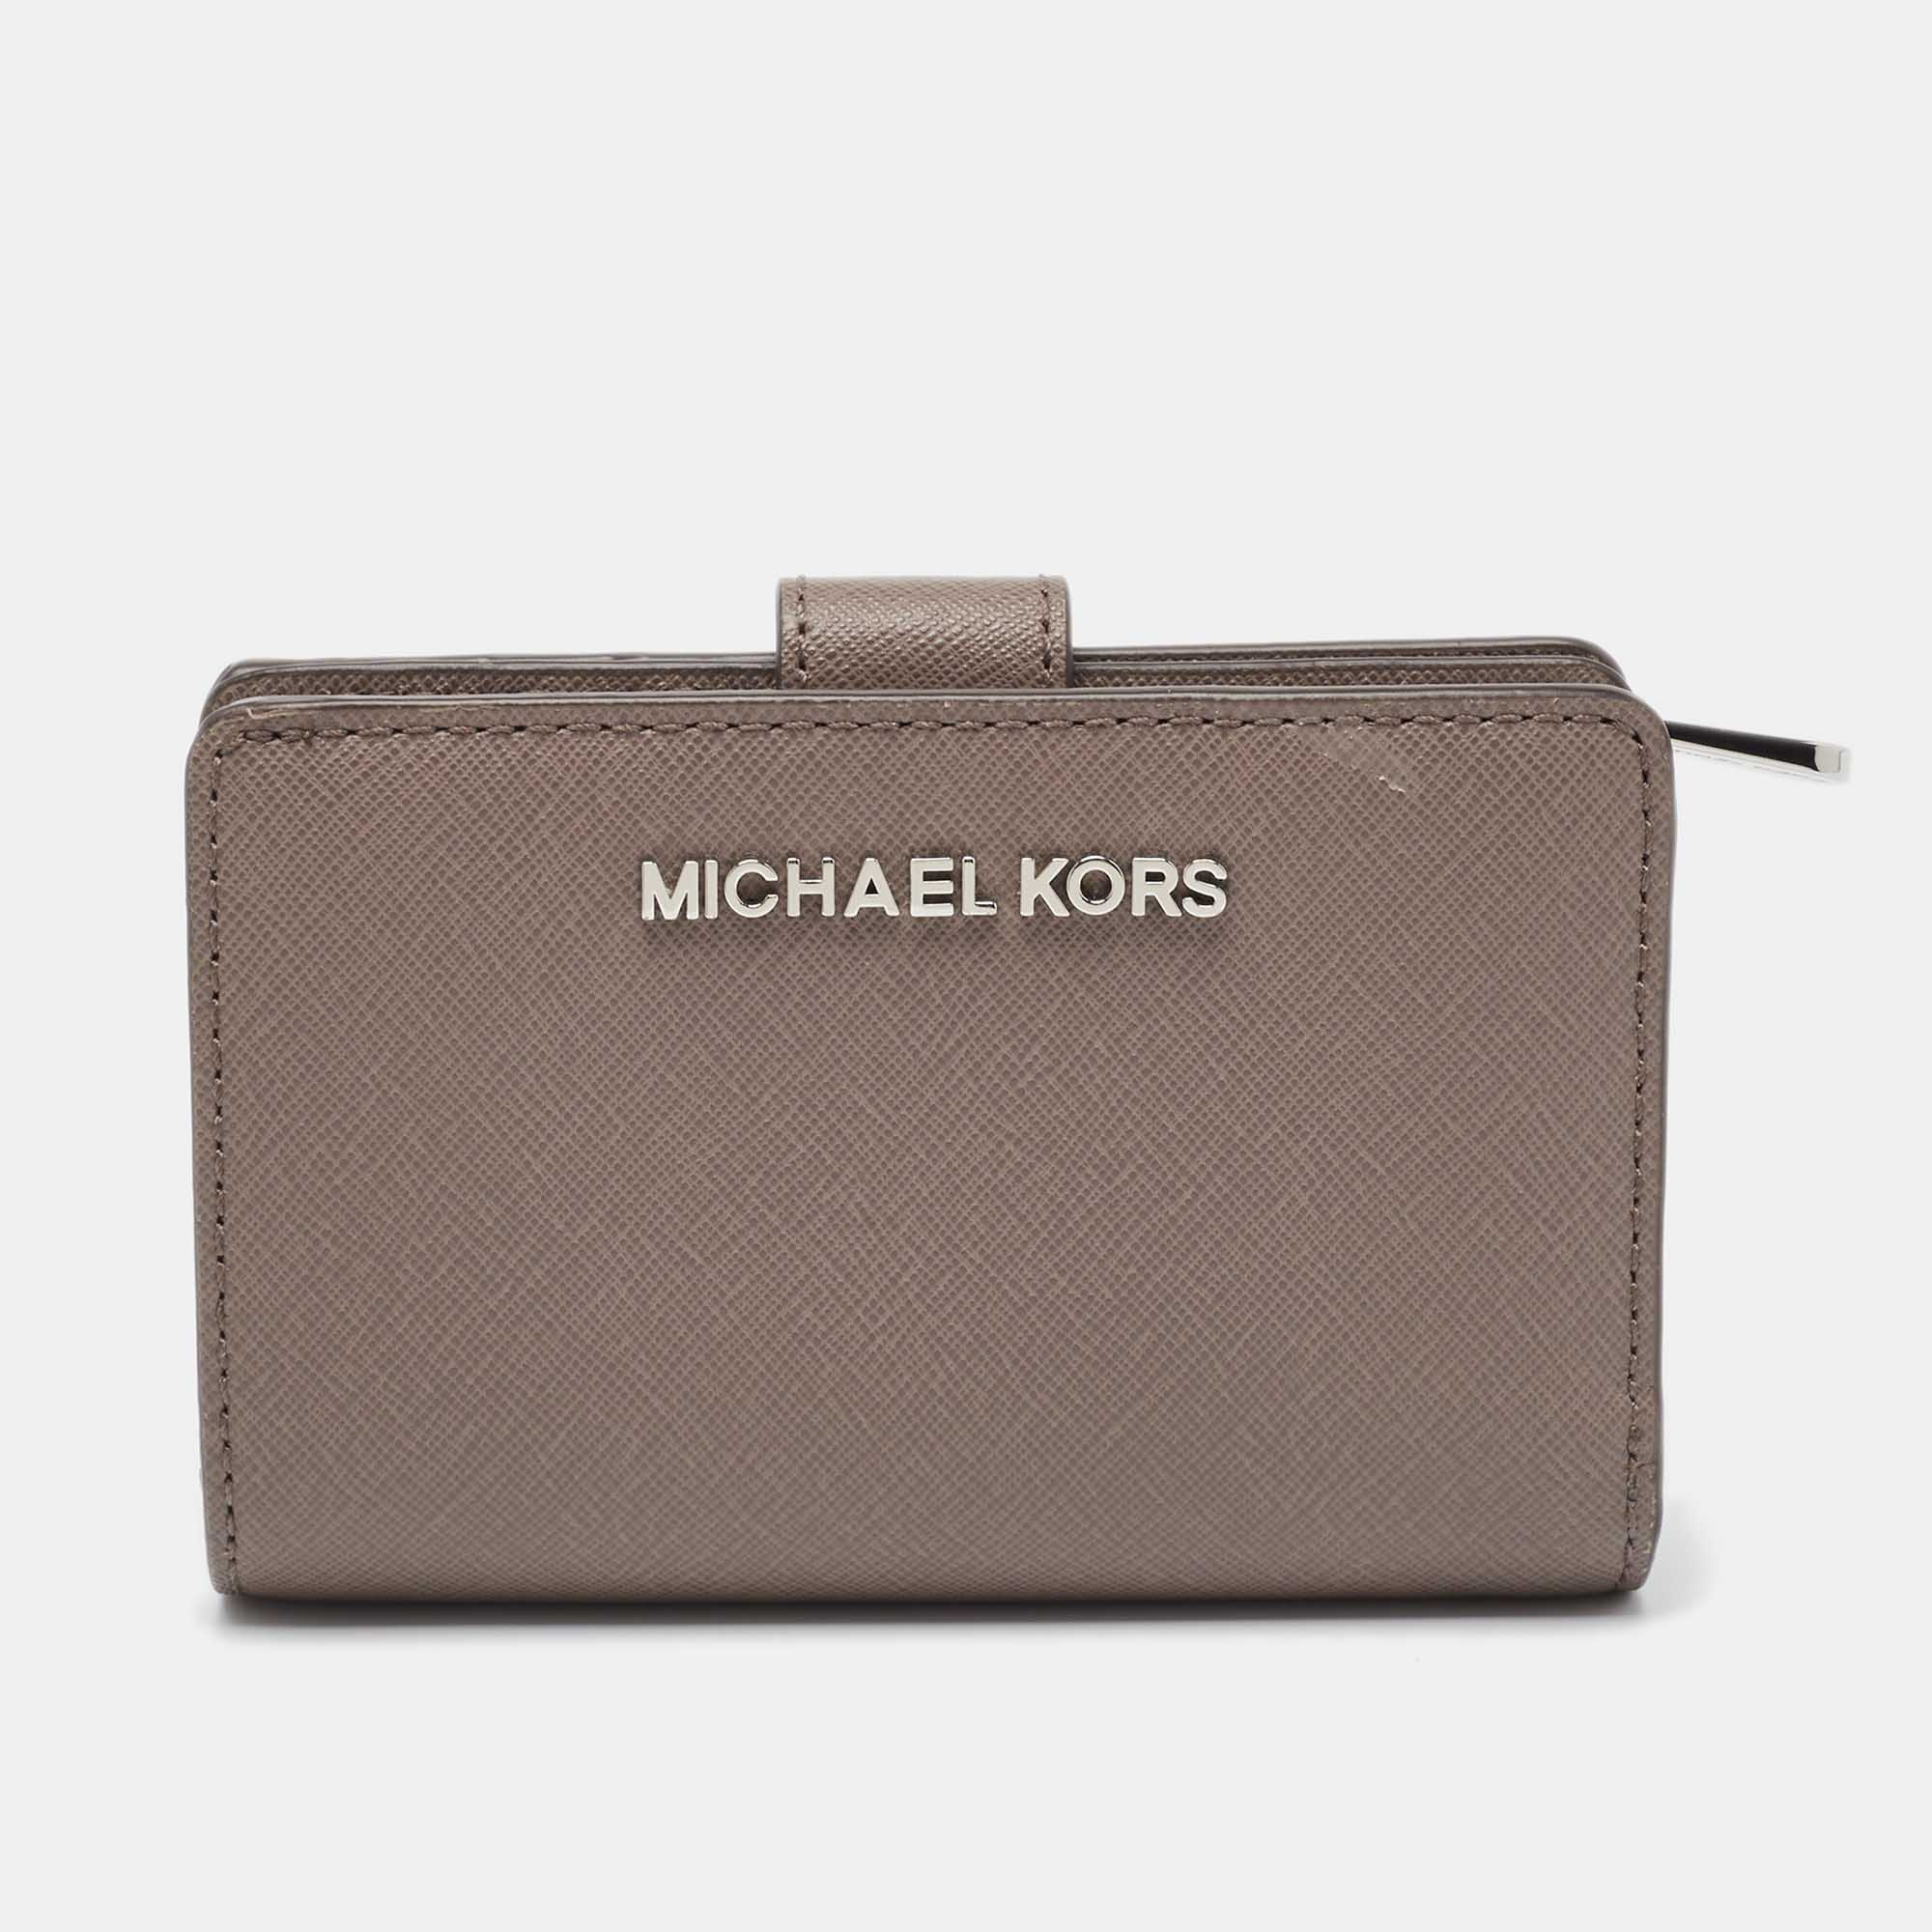 

Michael Kors Grey Saffiano Leather French Compact Wallet